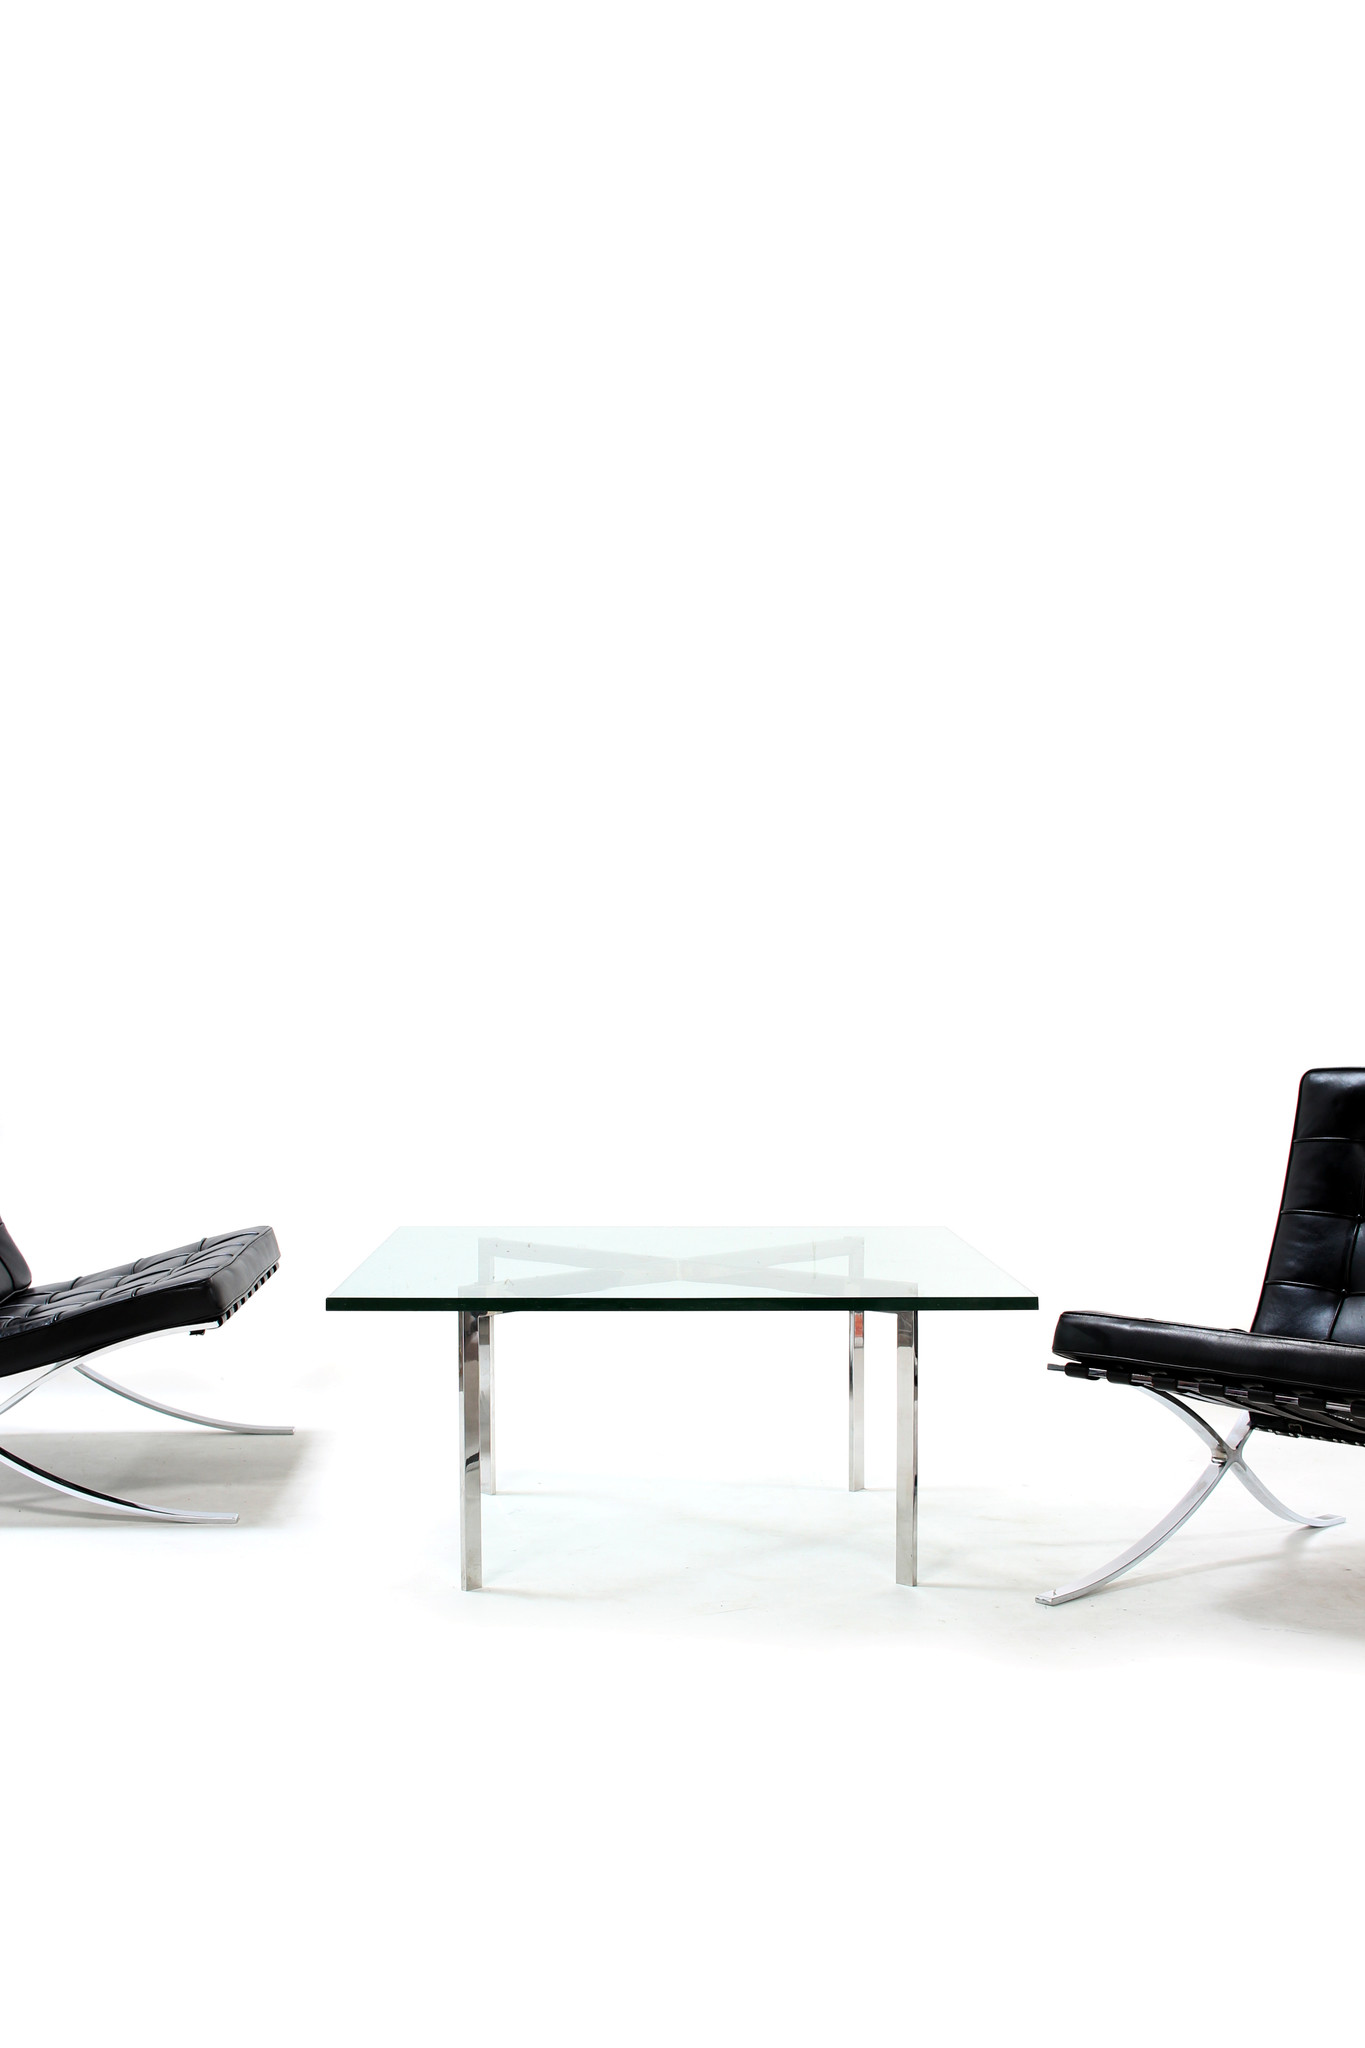 Set of 2 Barcelona Chairs for Knoll designed by Mies Van der Rohe